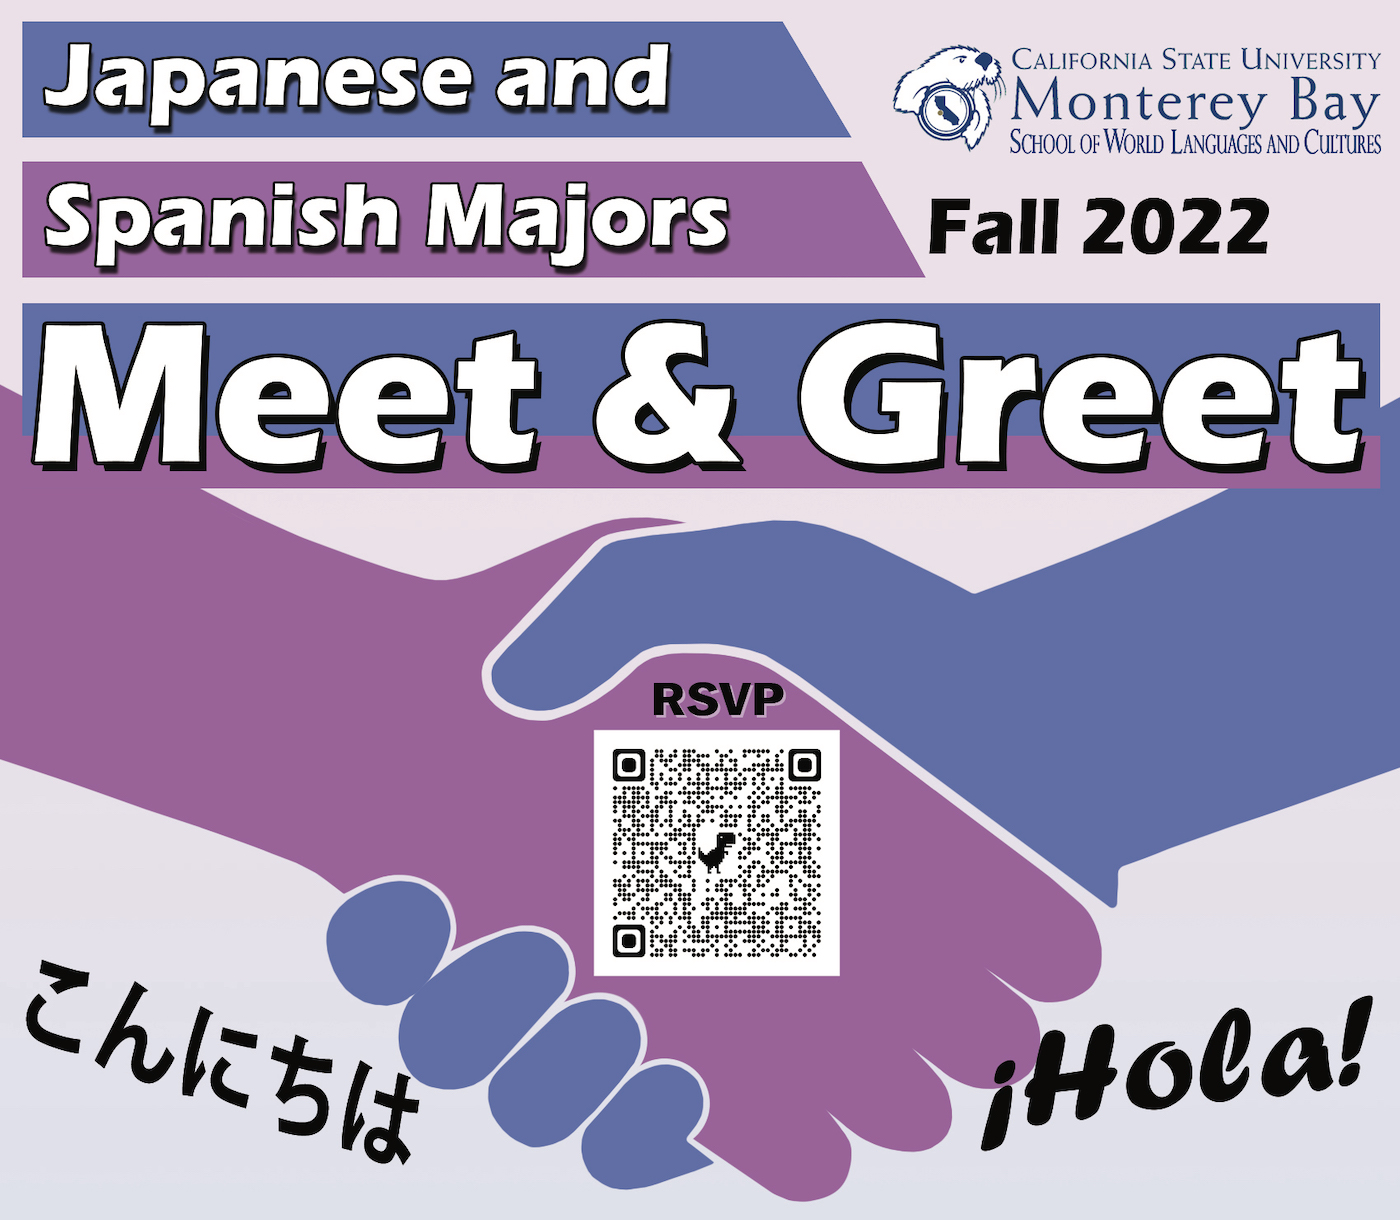 CSUMB WLC Fall 2022 Japanese and Spanish major meet and greet logo saying konnichiha and hola with QR code